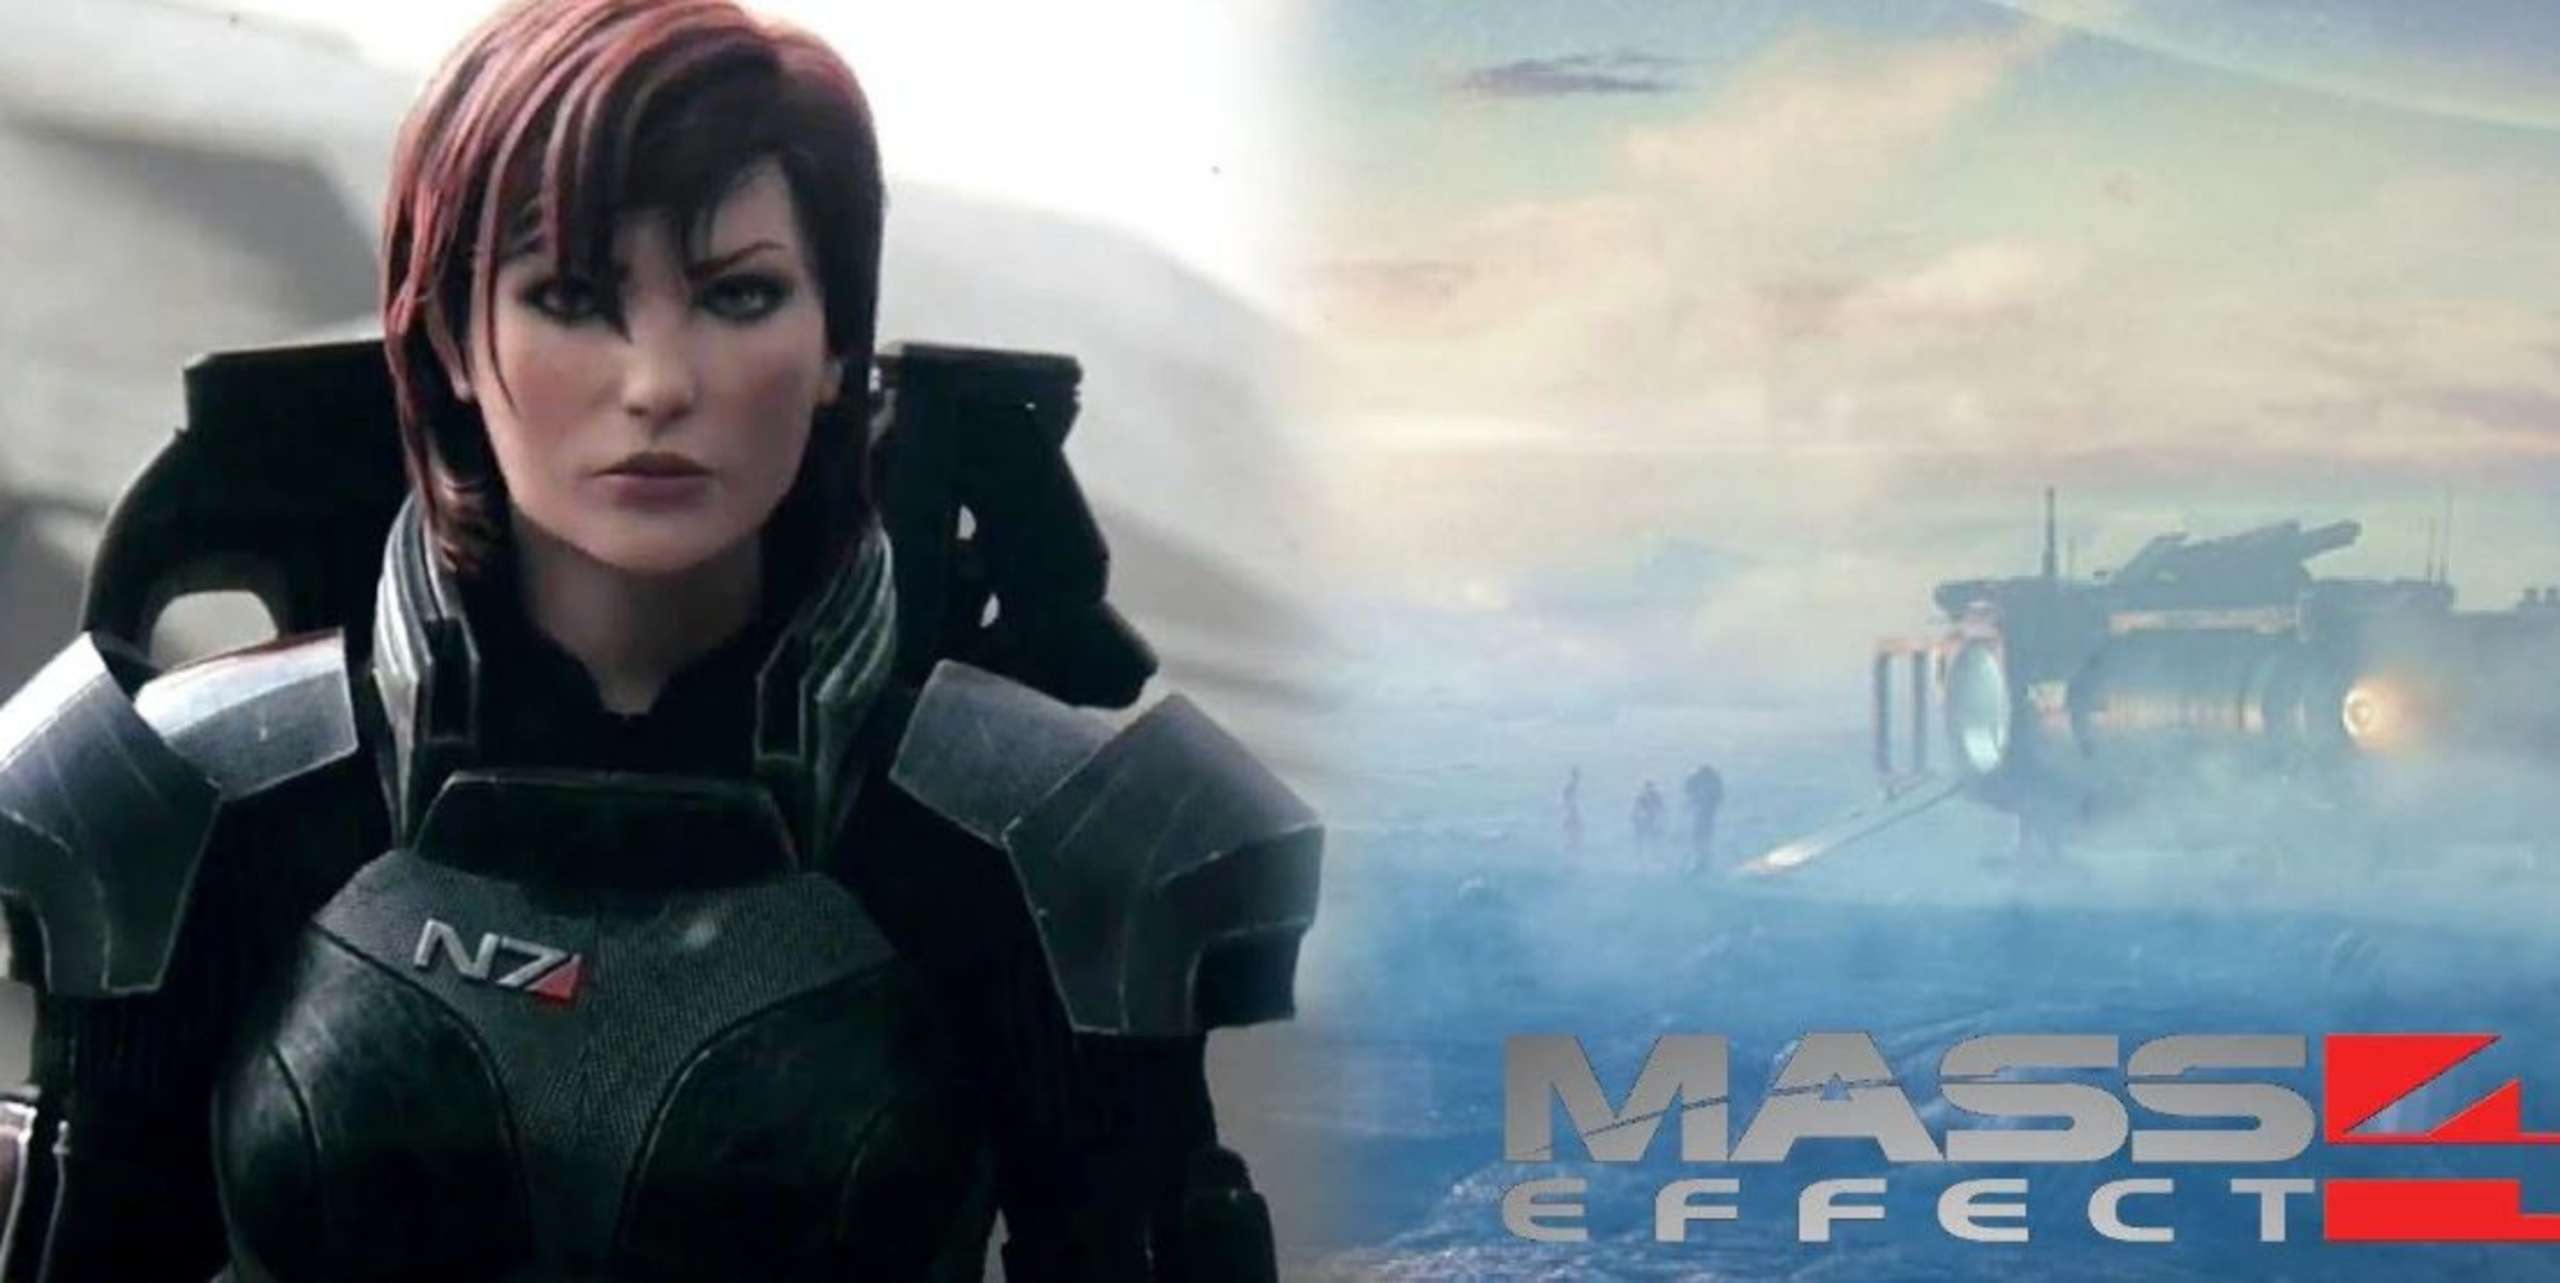 The Normandy Is One Component Of BioWare’s Mass Effect 4 That Should Not Be Revisited In The Fourth Major Installment